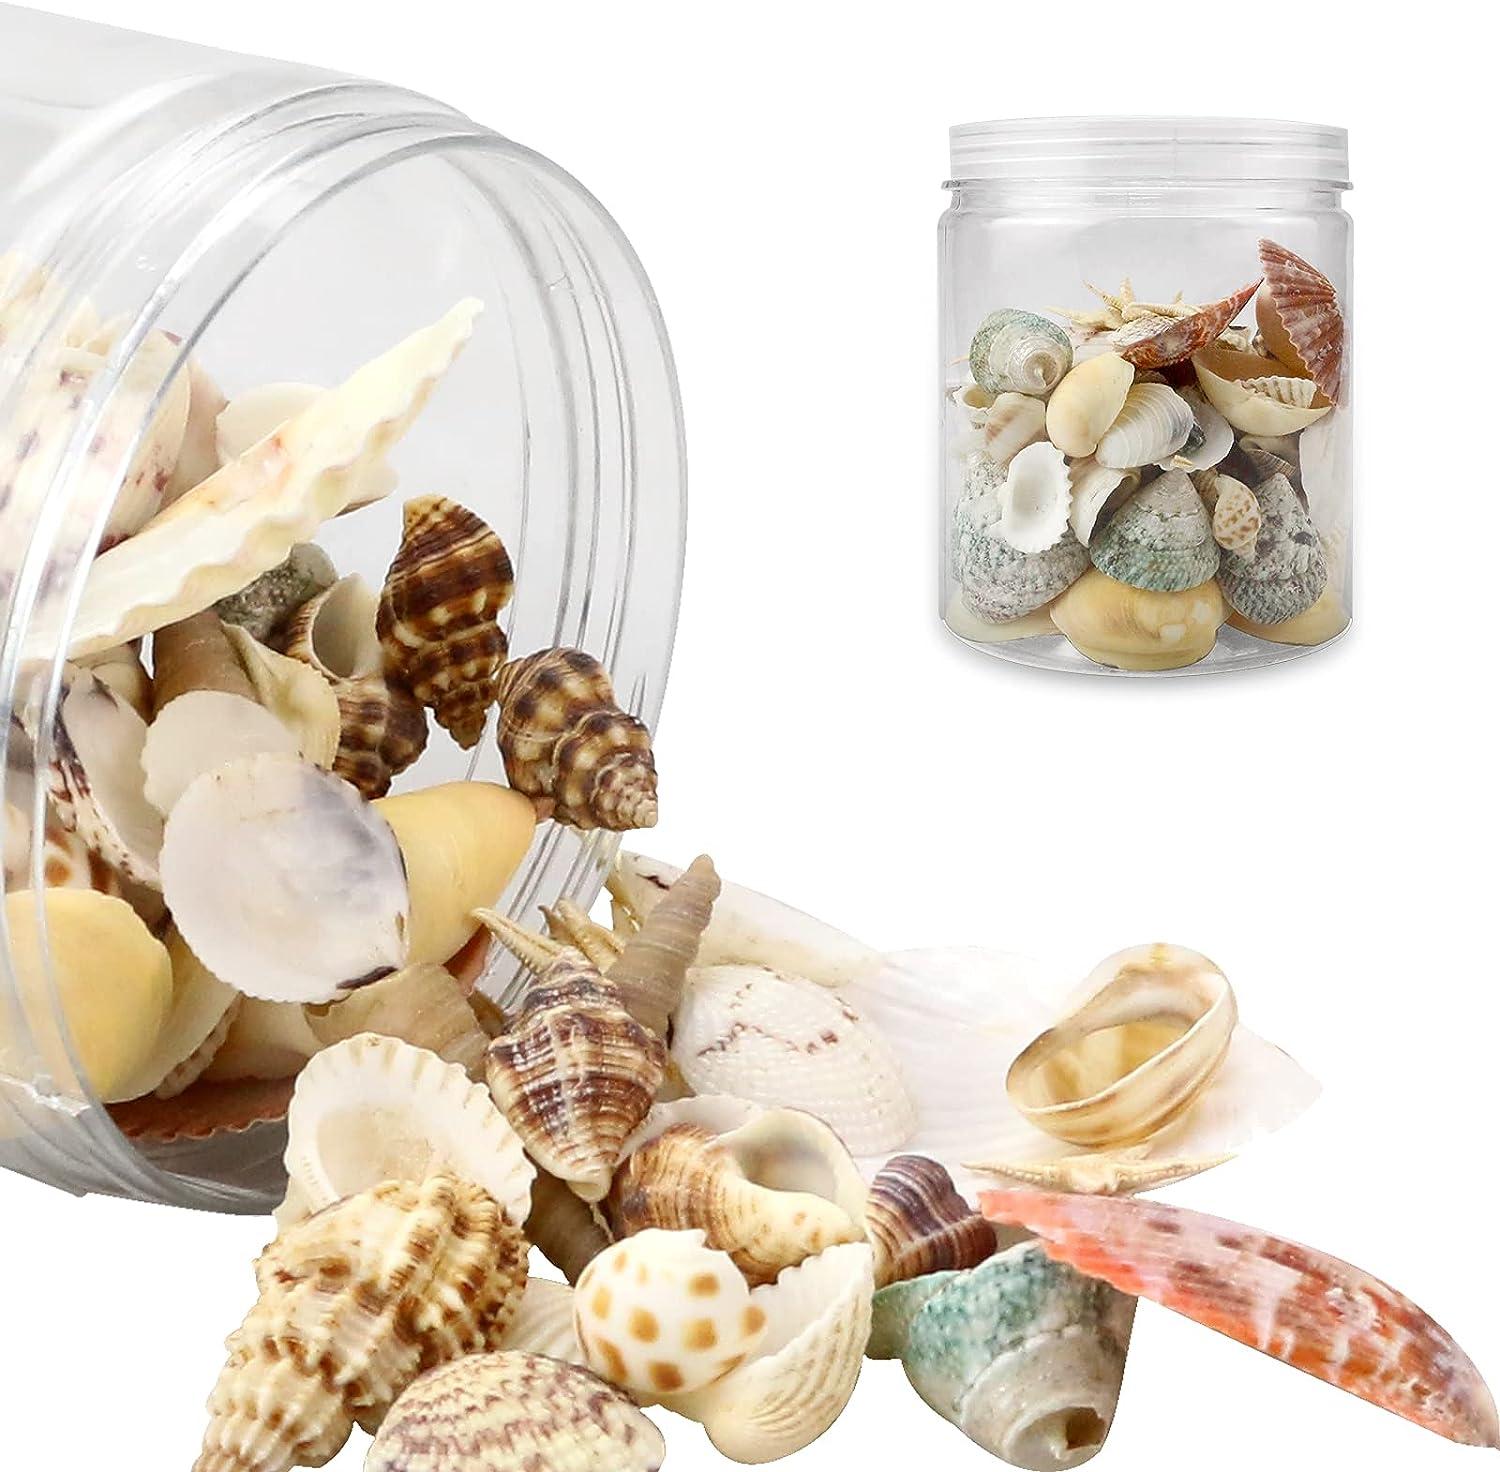 Weoxpr 2000 Pcs Tiny Sea Shells for Crafting,Mixed Ocean Beach Mini  Seashells Bulk for Home Decorations,Beach Theme Party, Small Shells for  Craft